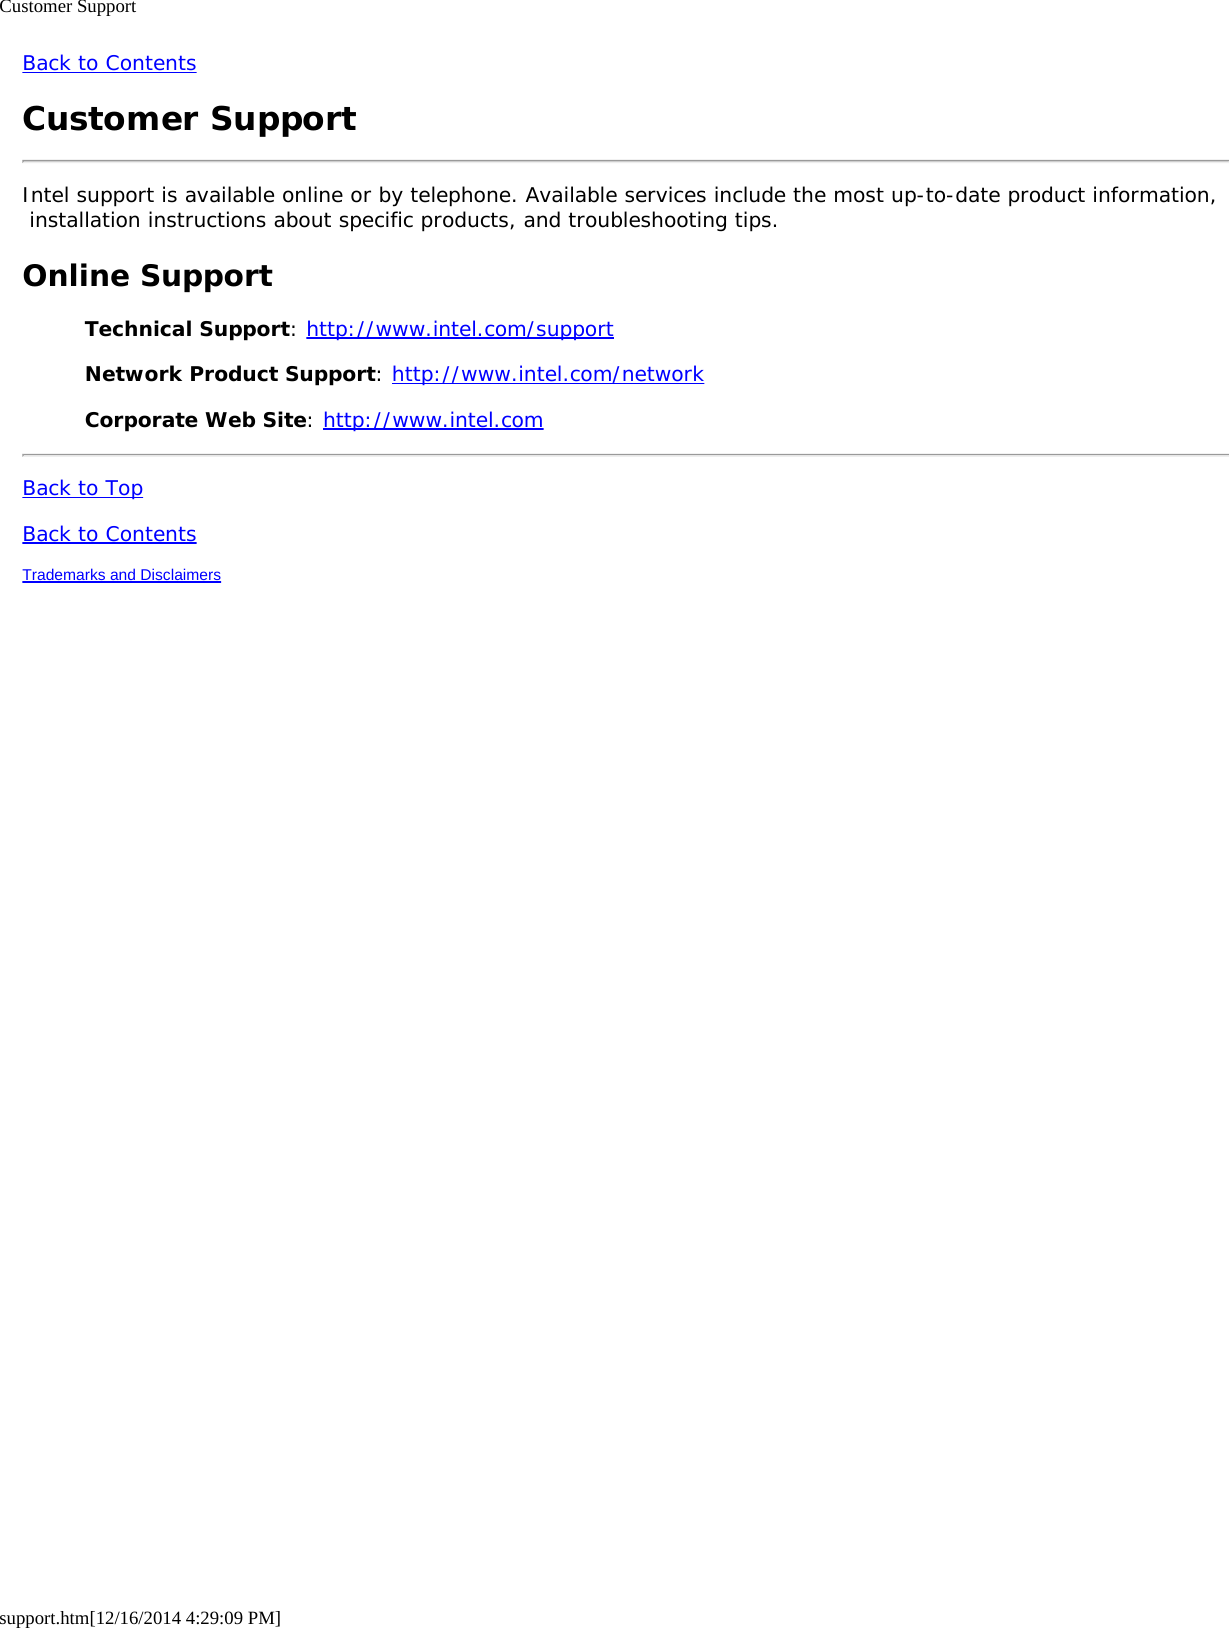 Customer Supportsupport.htm[12/16/2014 4:29:09 PM]Back to ContentsCustomer SupportIntel support is available online or by telephone. Available services include the most up-to-date product information, installation instructions about specific products, and troubleshooting tips.Online SupportTechnical Support: http://www.intel.com/supportNetwork Product Support: http://www.intel.com/networkCorporate Web Site: http://www.intel.comBack to TopBack to ContentsTrademarks and Disclaimers